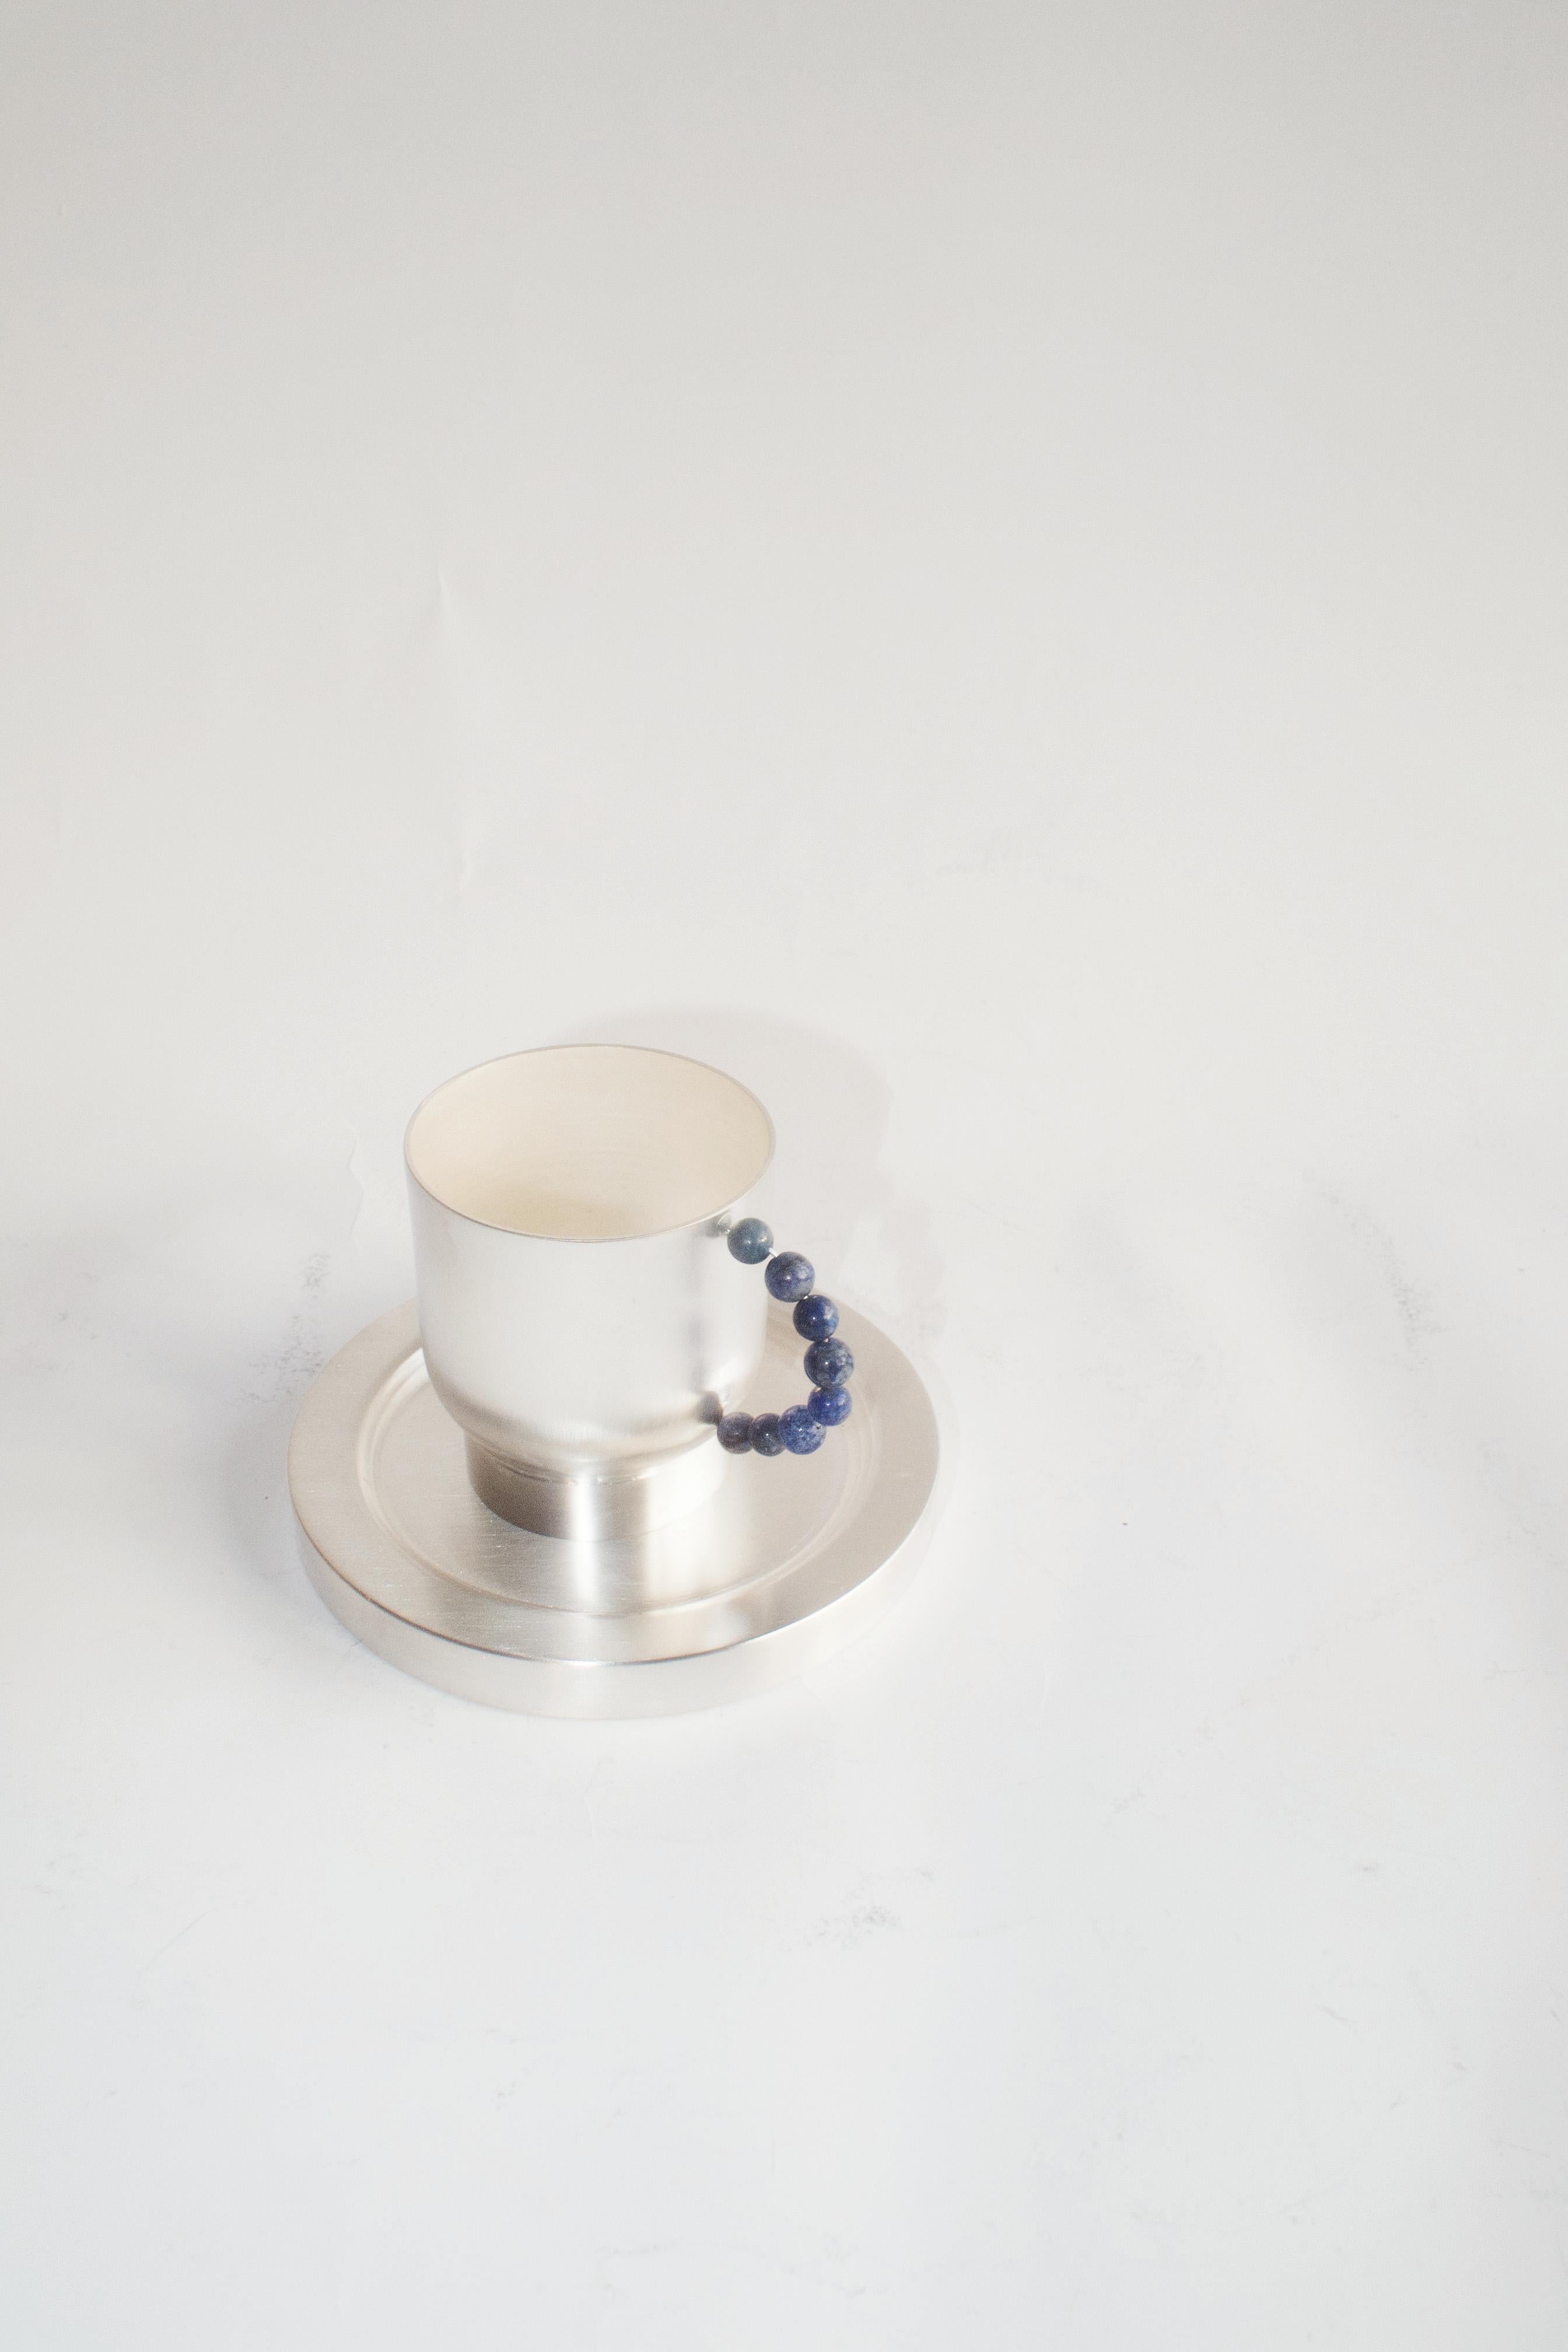 Contemporary Lapis Lazuli Set Handle Tea Cup Plate Silver Plated Natalia Criado In New Condition For Sale In Milan, IT